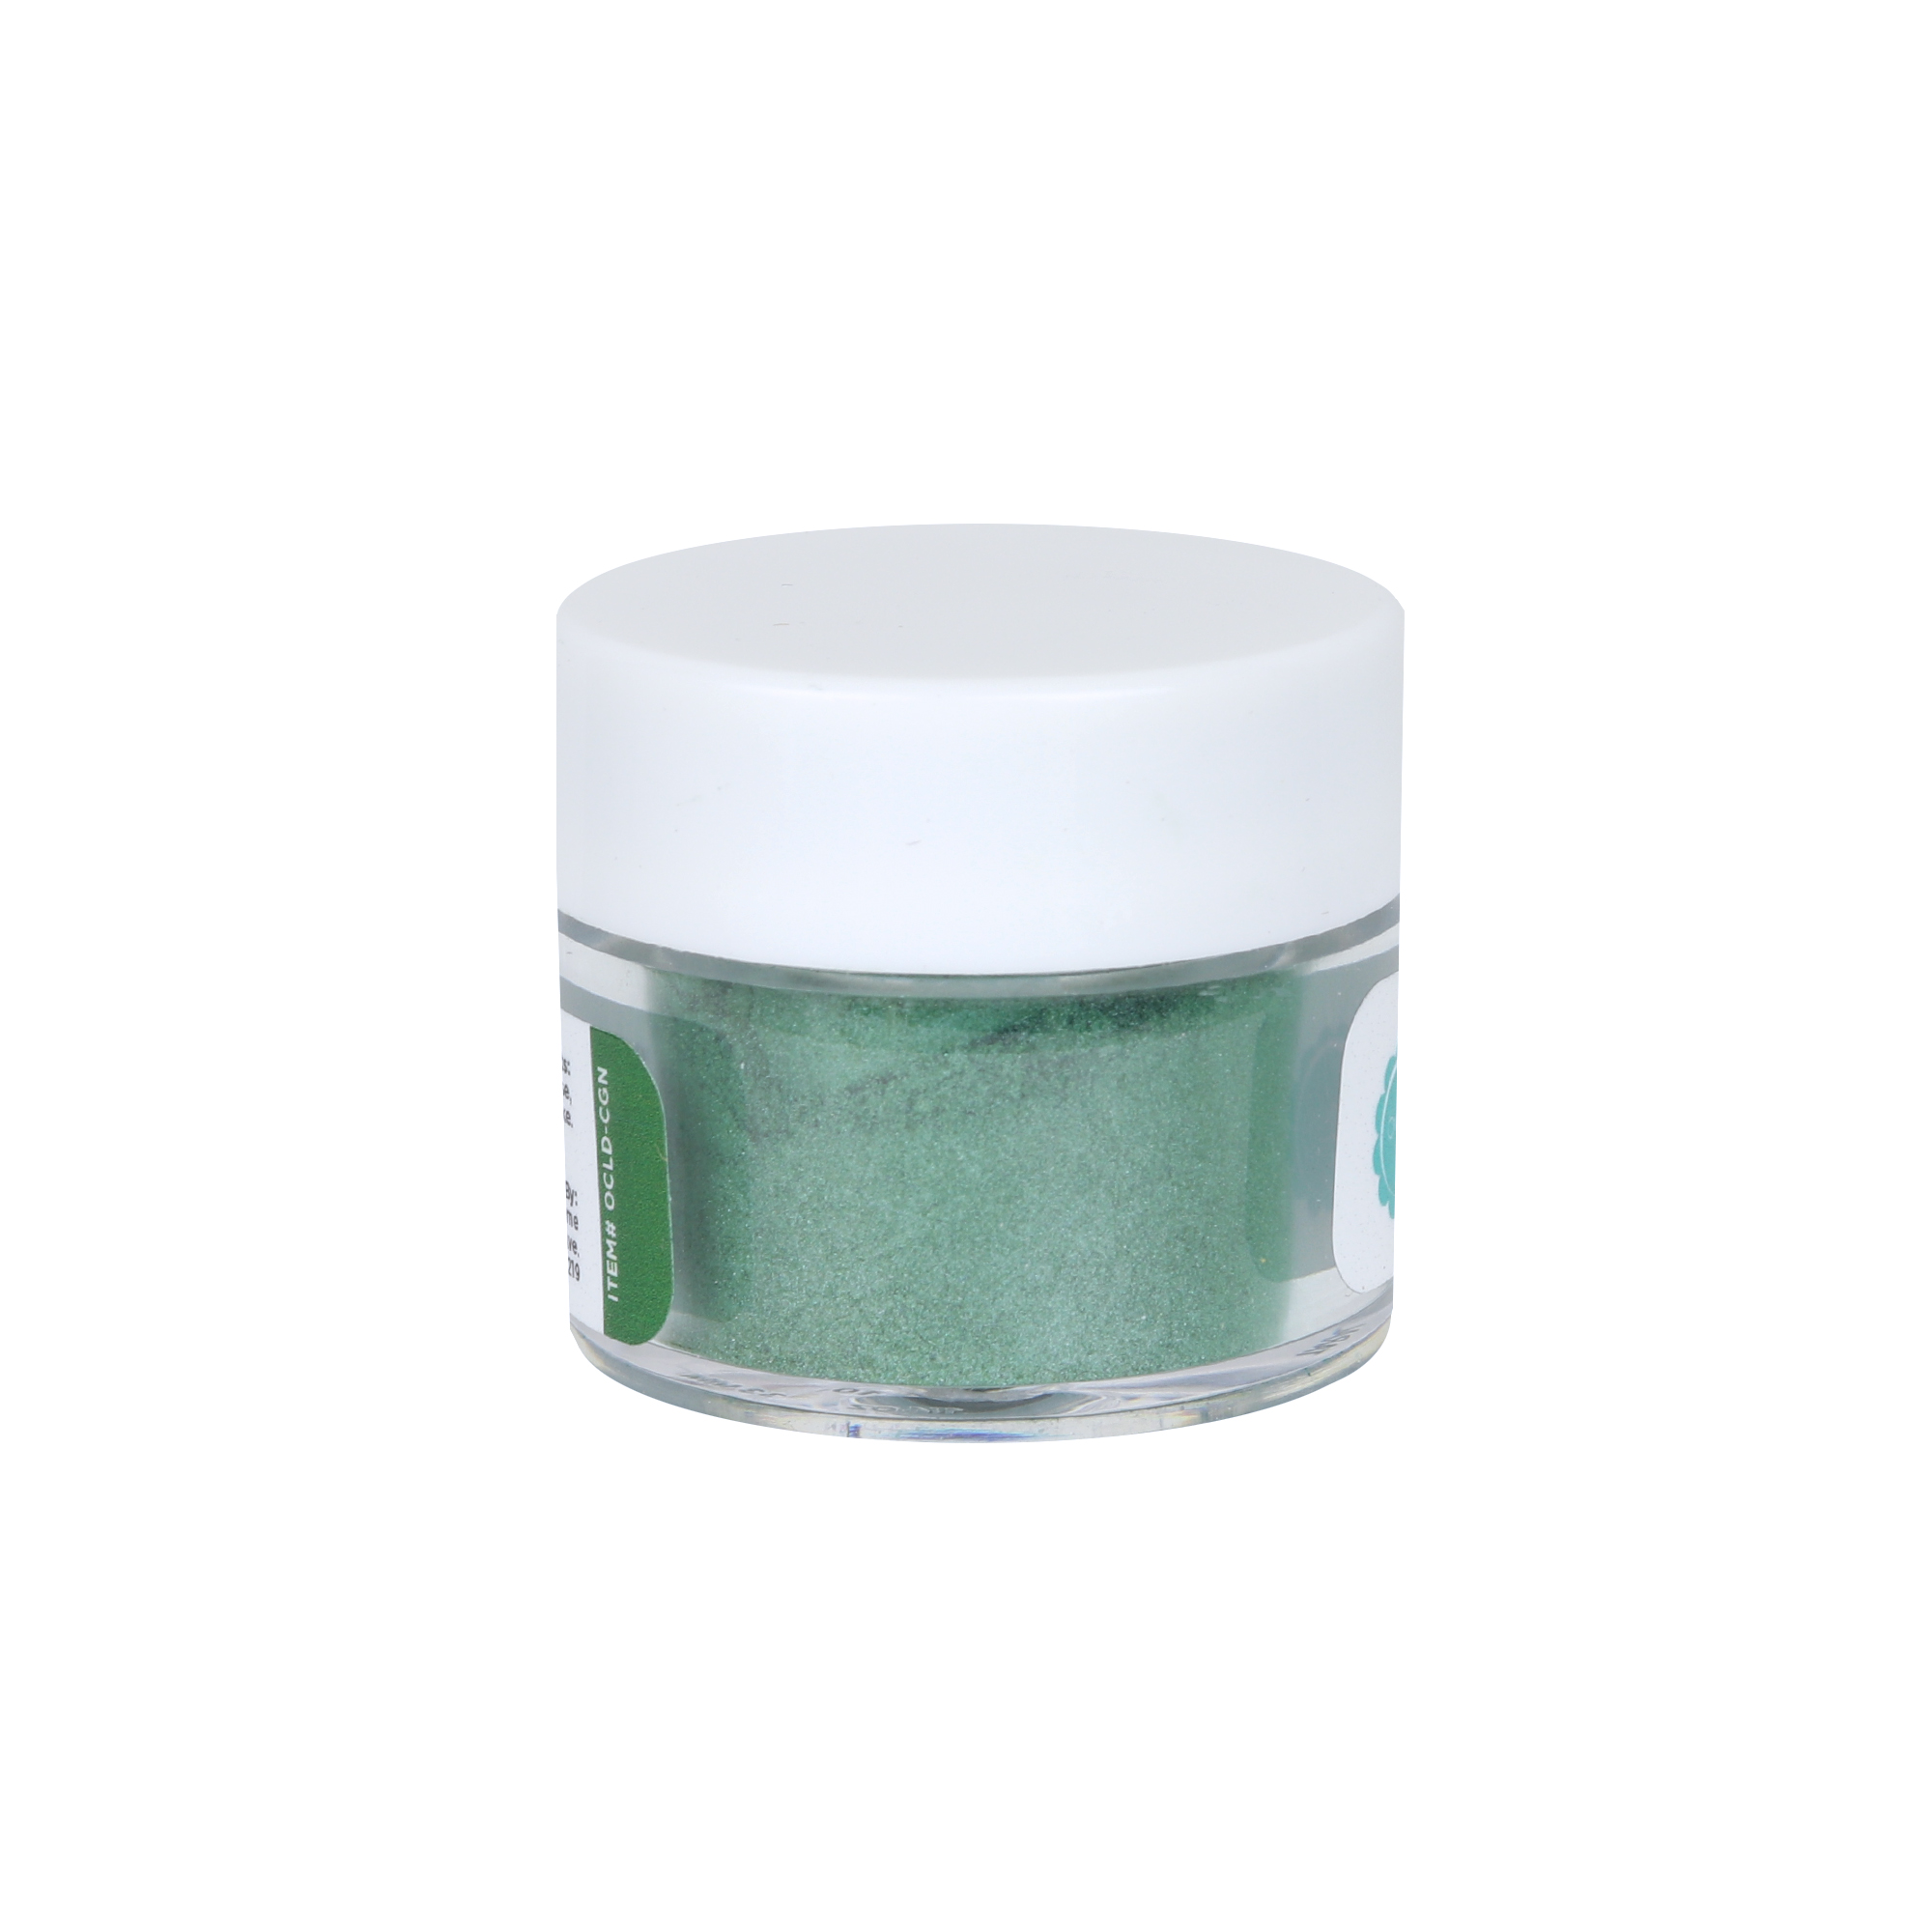 O'Creme Holiday Green Luster Dust, 4 gr. image 2